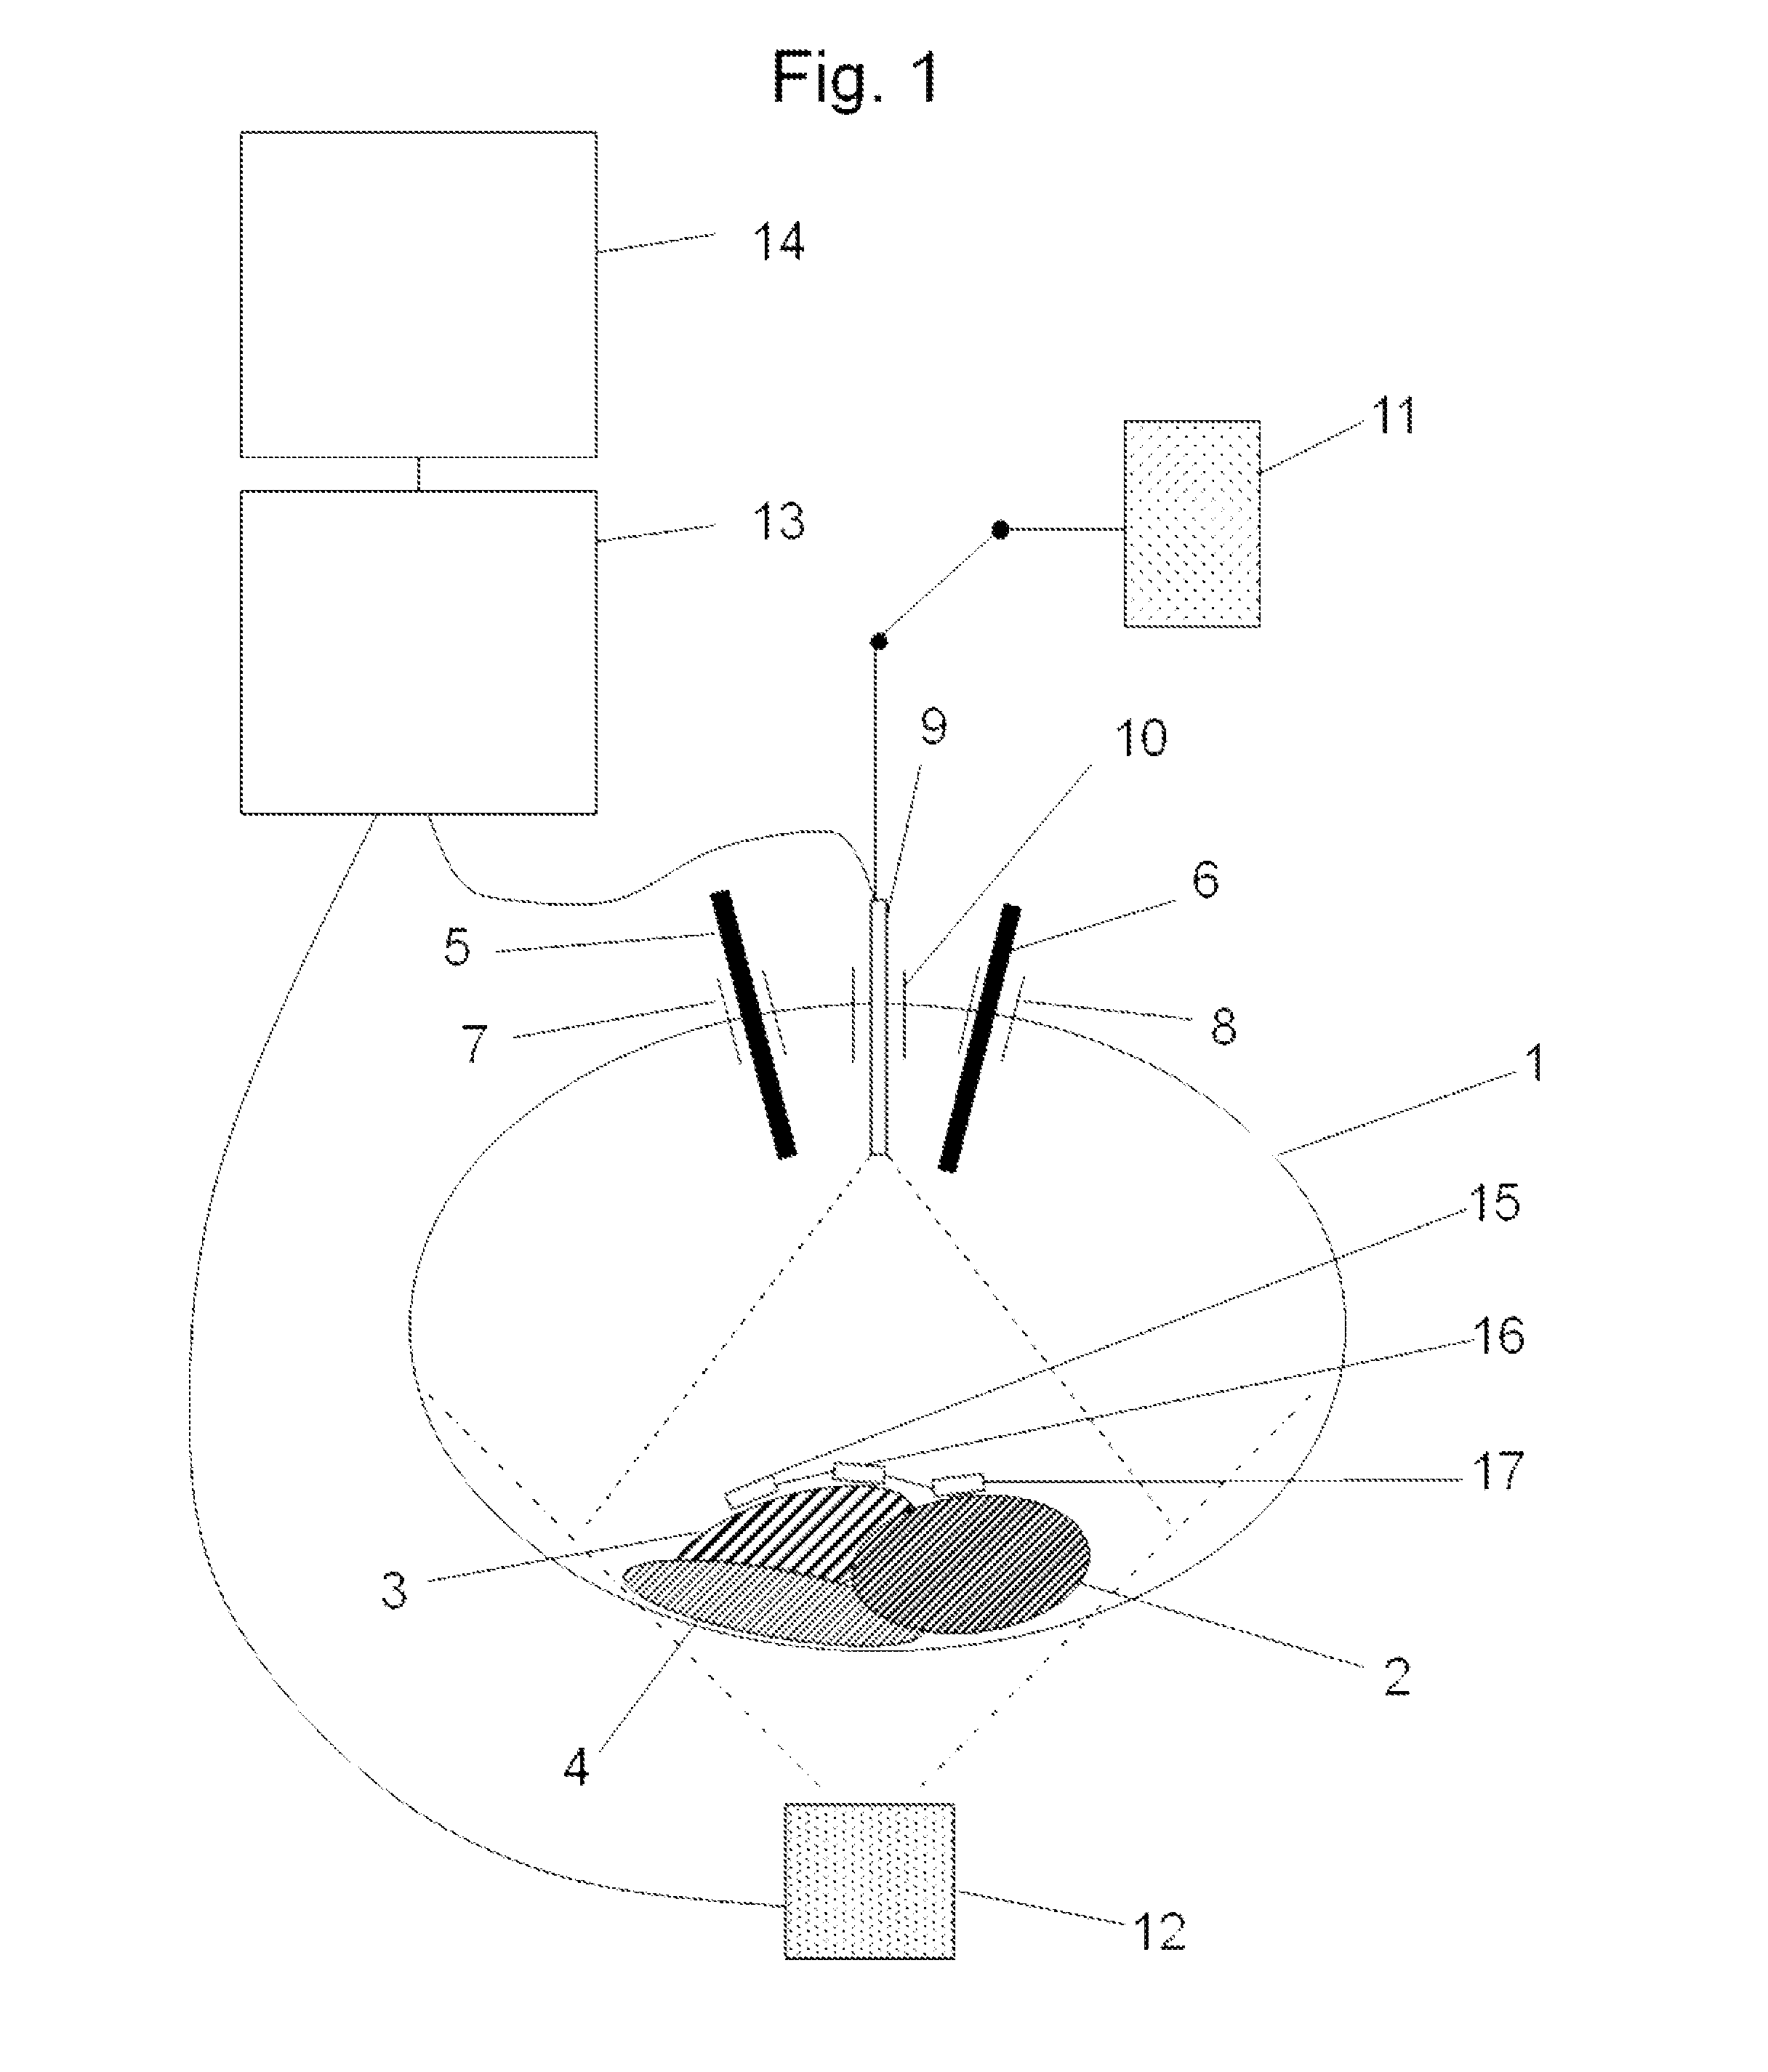 Imaging System for Following a Surgical Tool in an Operation Field